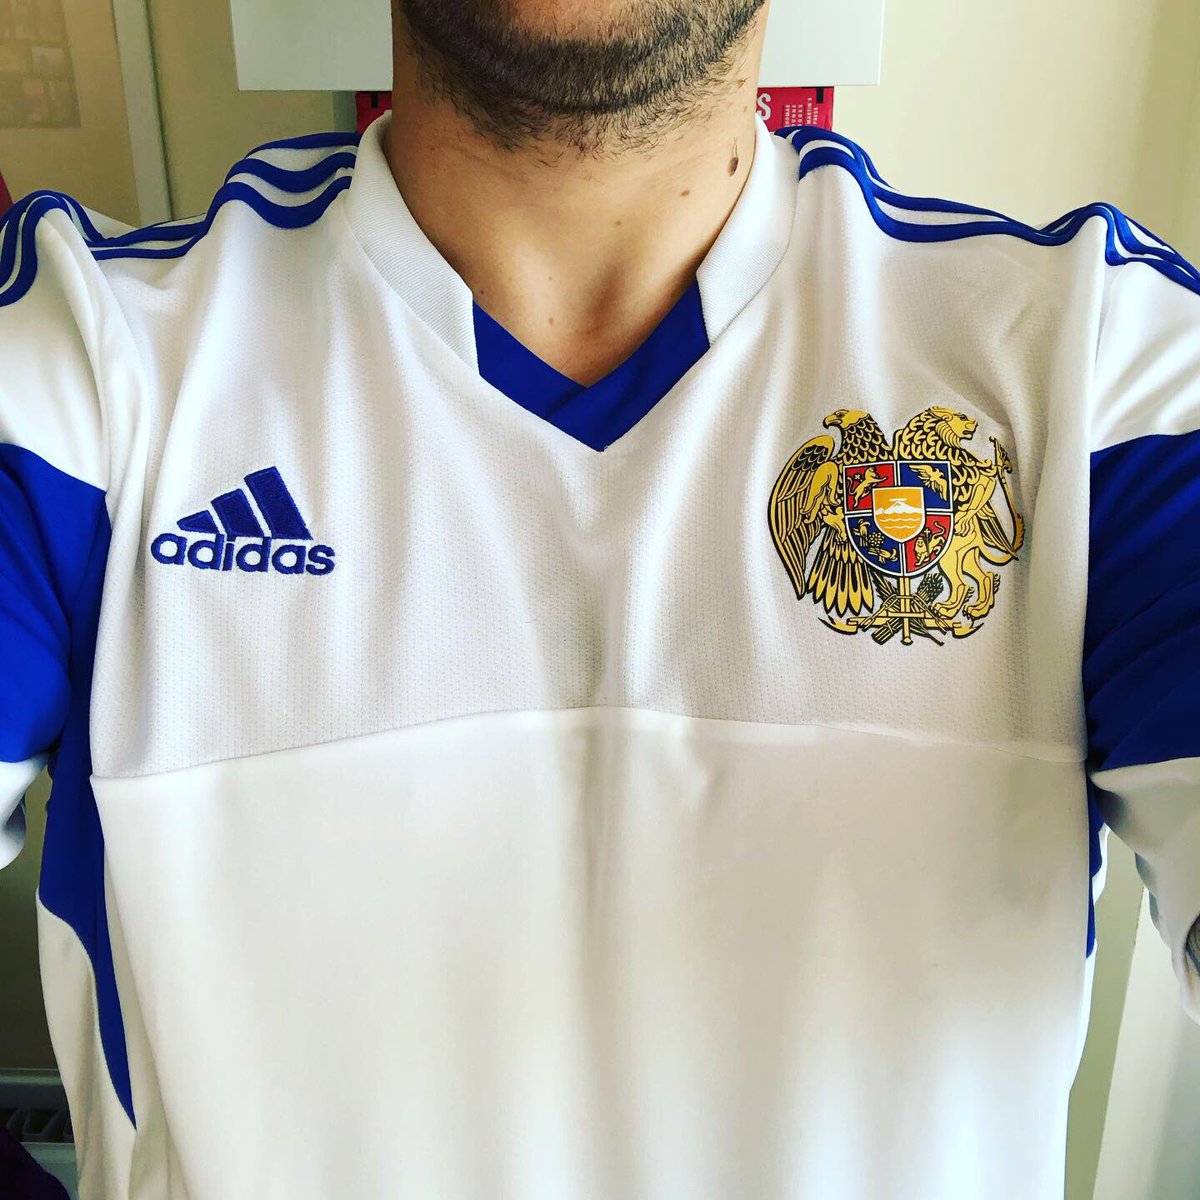  @OfficialArmFFAway Kit, 2017/18Adidas, unofficial (?) replicaI got this on Ebay after failing to find an  #Armenia shirt when I travelled there 2 years ago; I doubt it’s officially licensed, though it looks like the kit they wore in some 2018 WC qualifiers, so I might be wrong